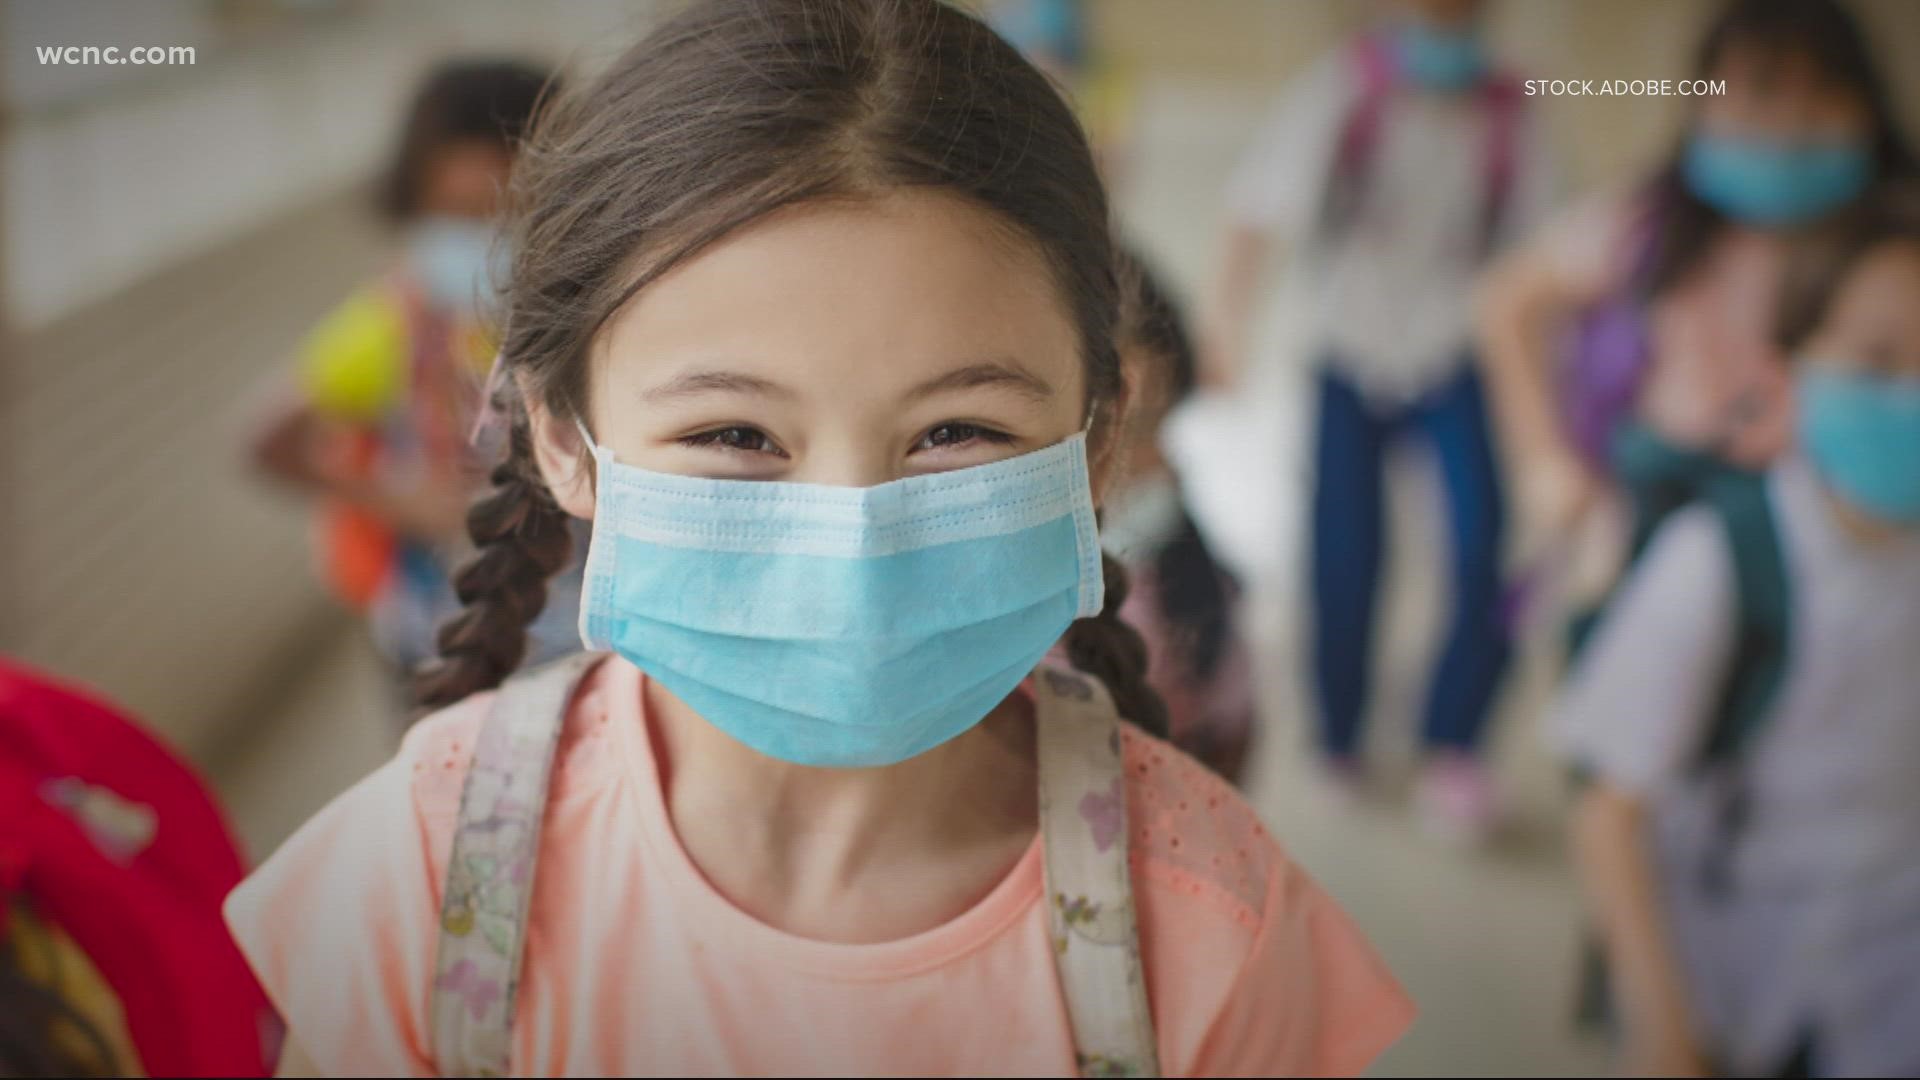 As the delta variant continues to surge and many kids are unvaccinated ,health experts say masks are the best way to fight COVID-19 in schools.